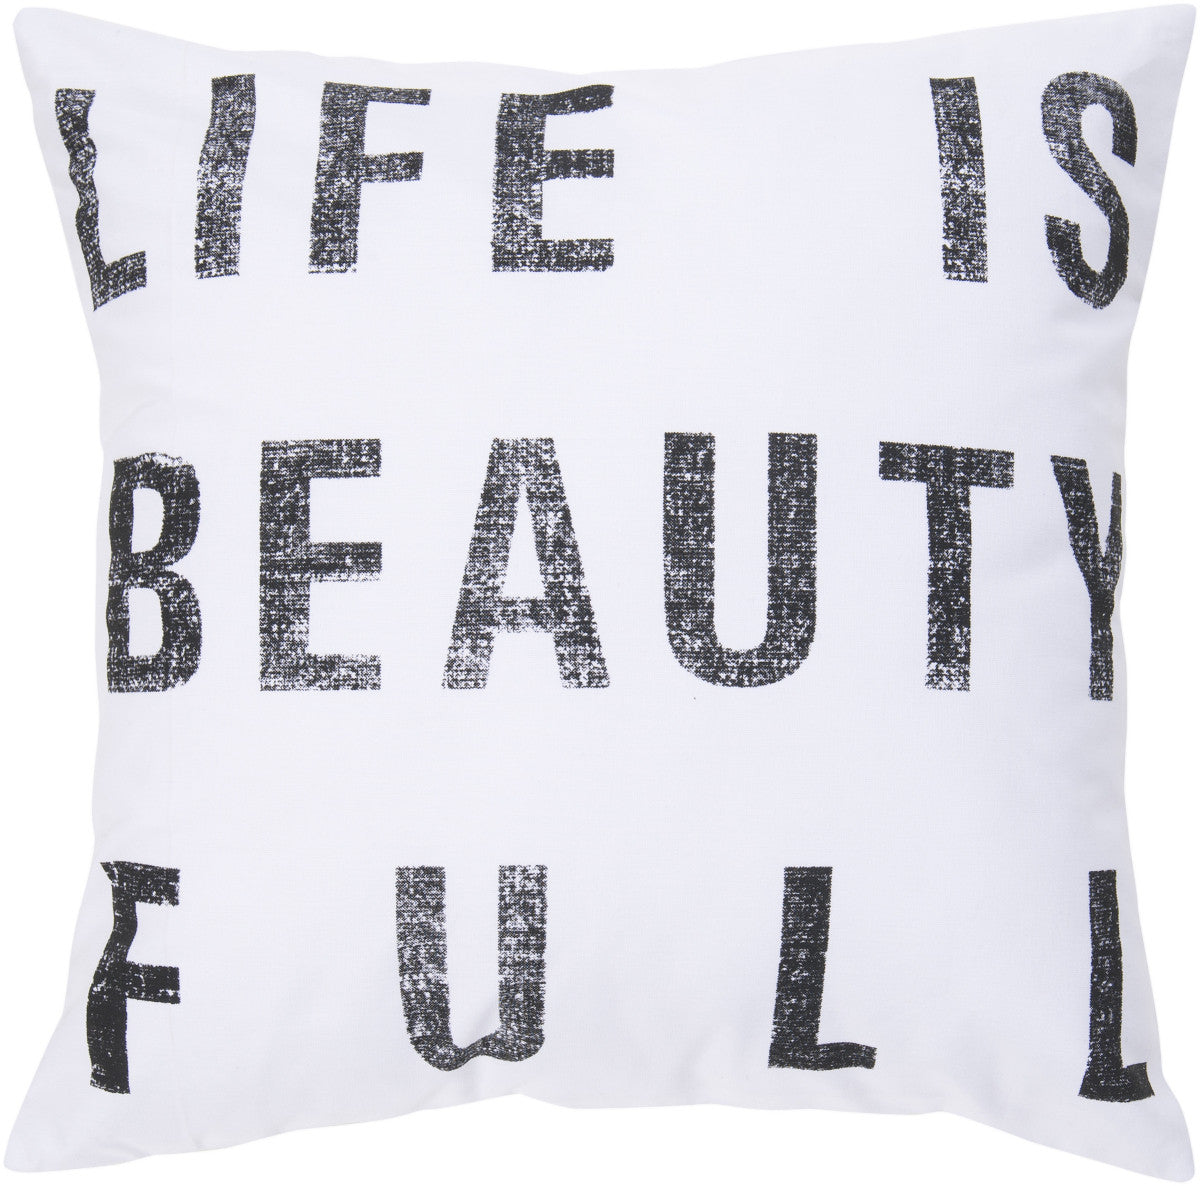 Surya Typography Life is Beauty ST-081 Pillow